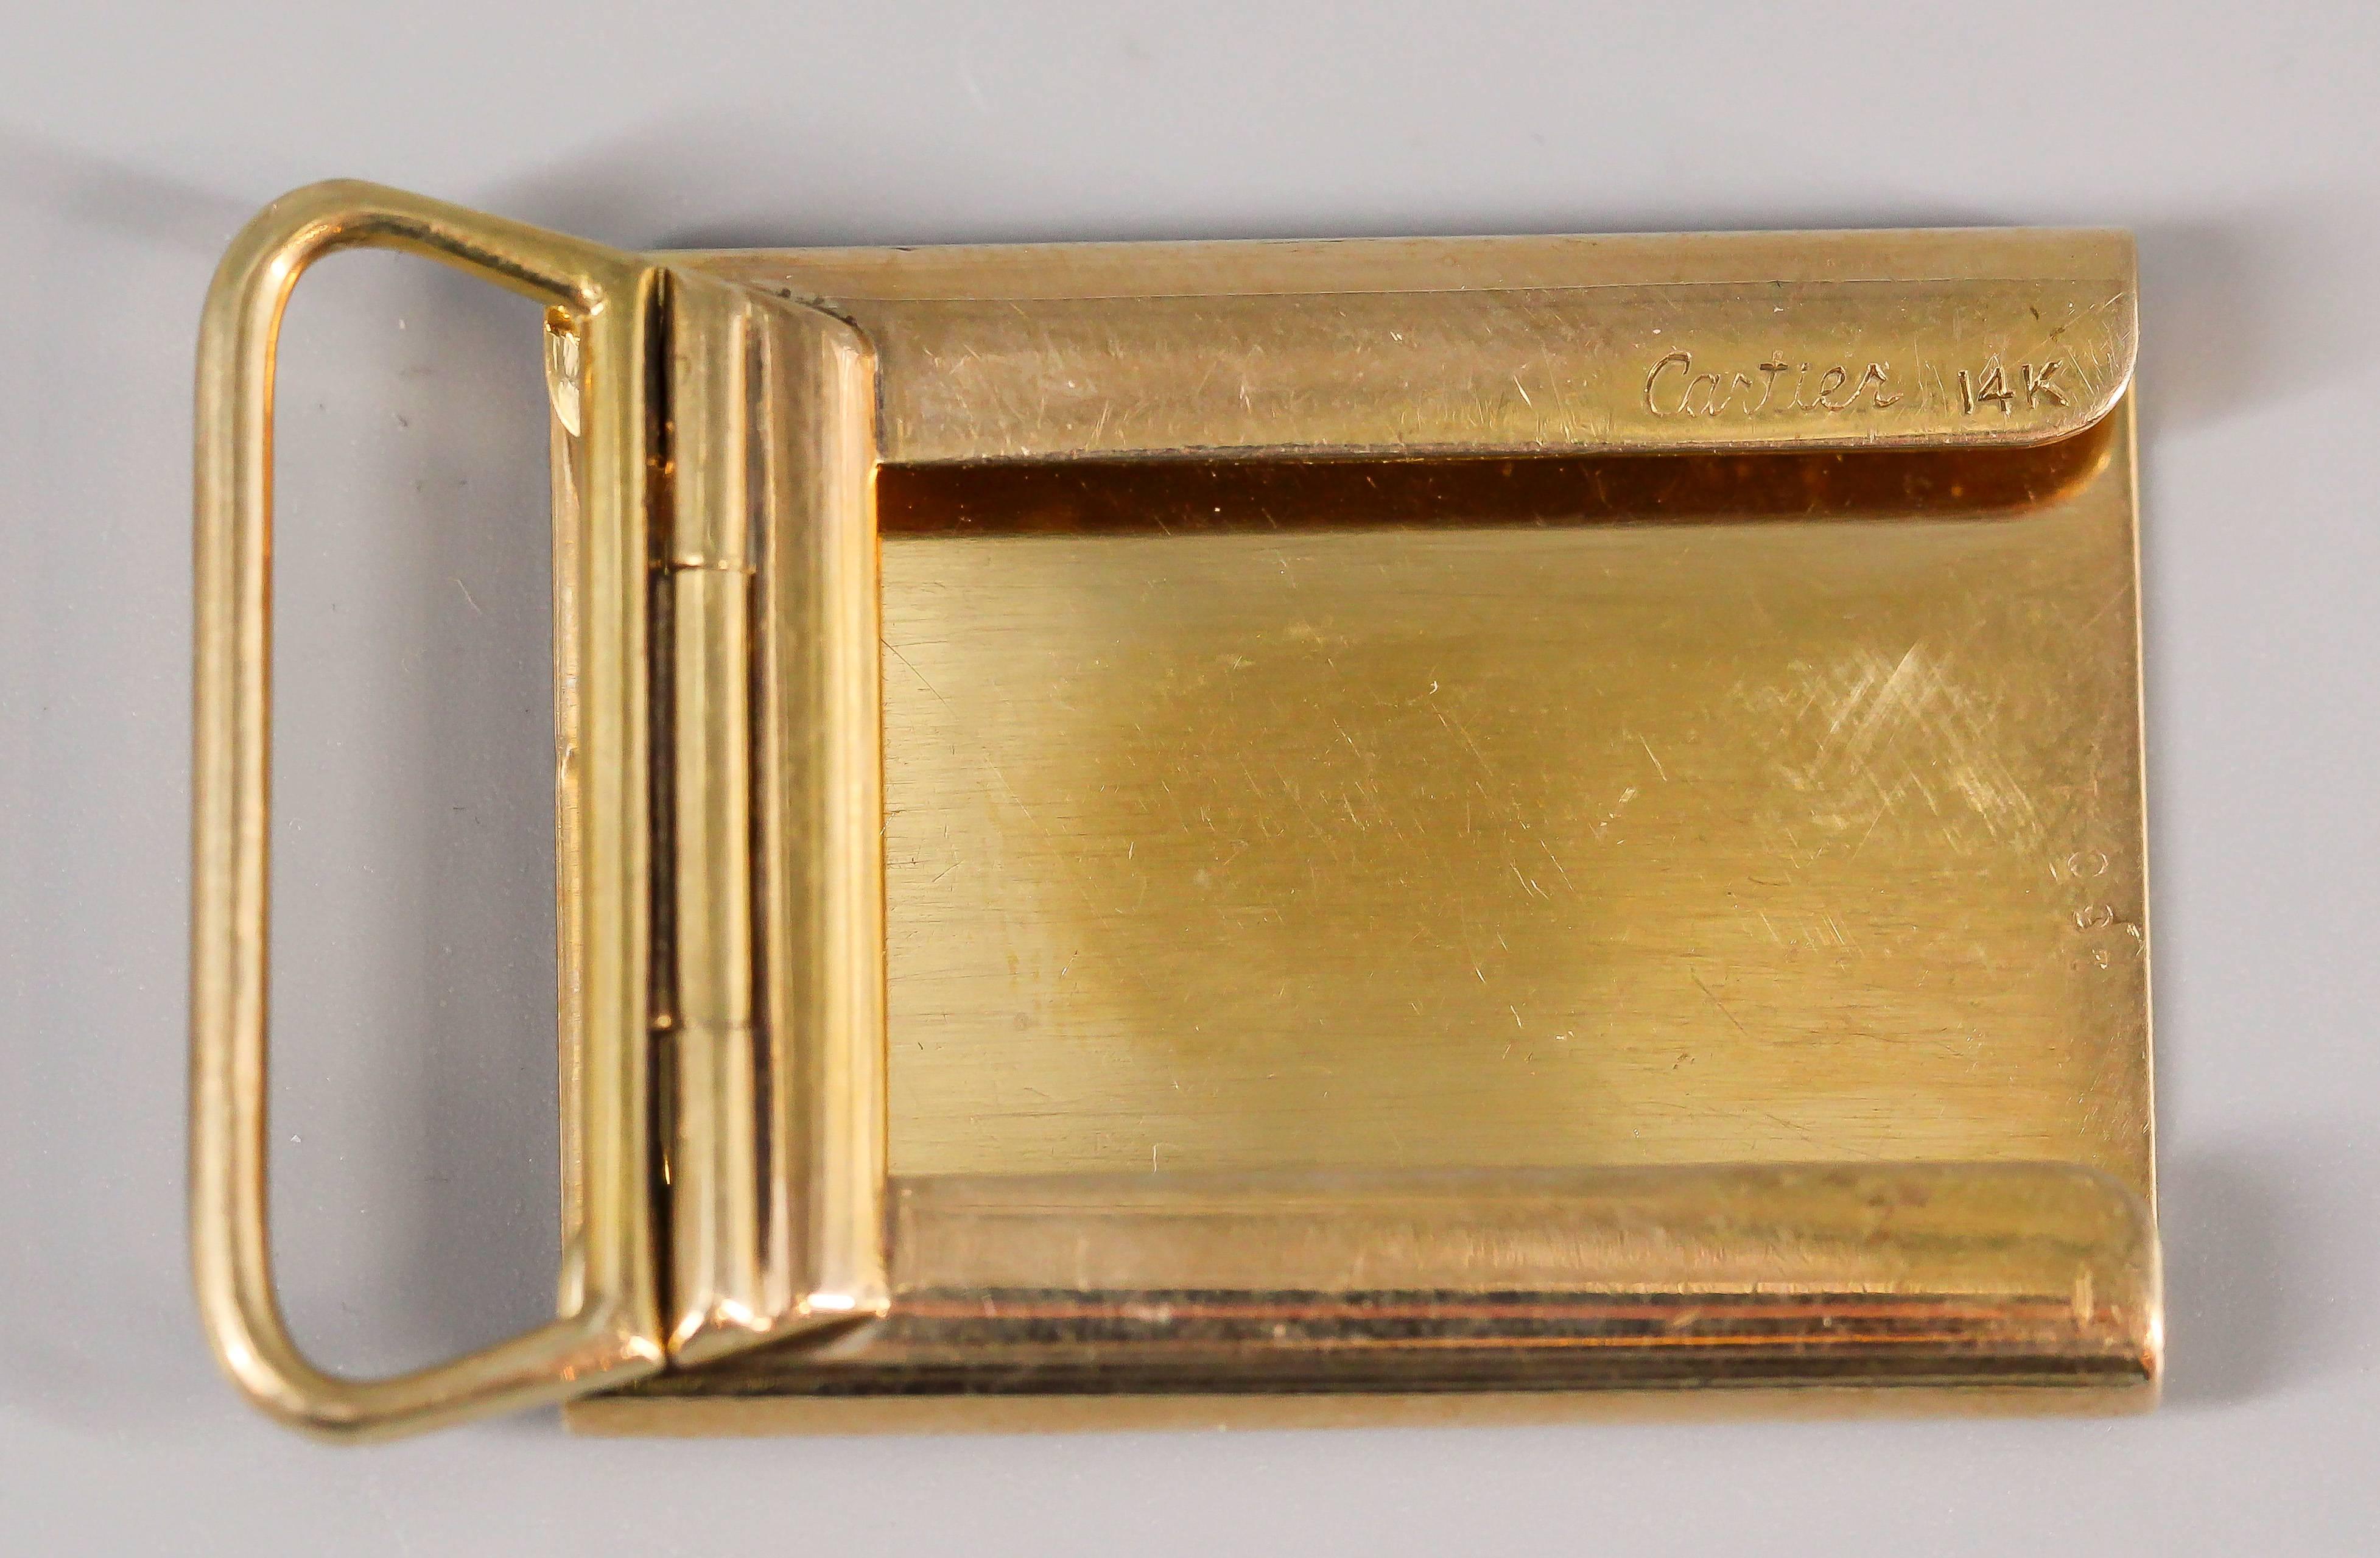 Whimsical 14K yellow gold belt buckle by Cartier, circa 1950s. It features an engine turned pattern front.  Handsomely made and highly usable. 

Hallmarks: Cartier, 14k, reference numbers.